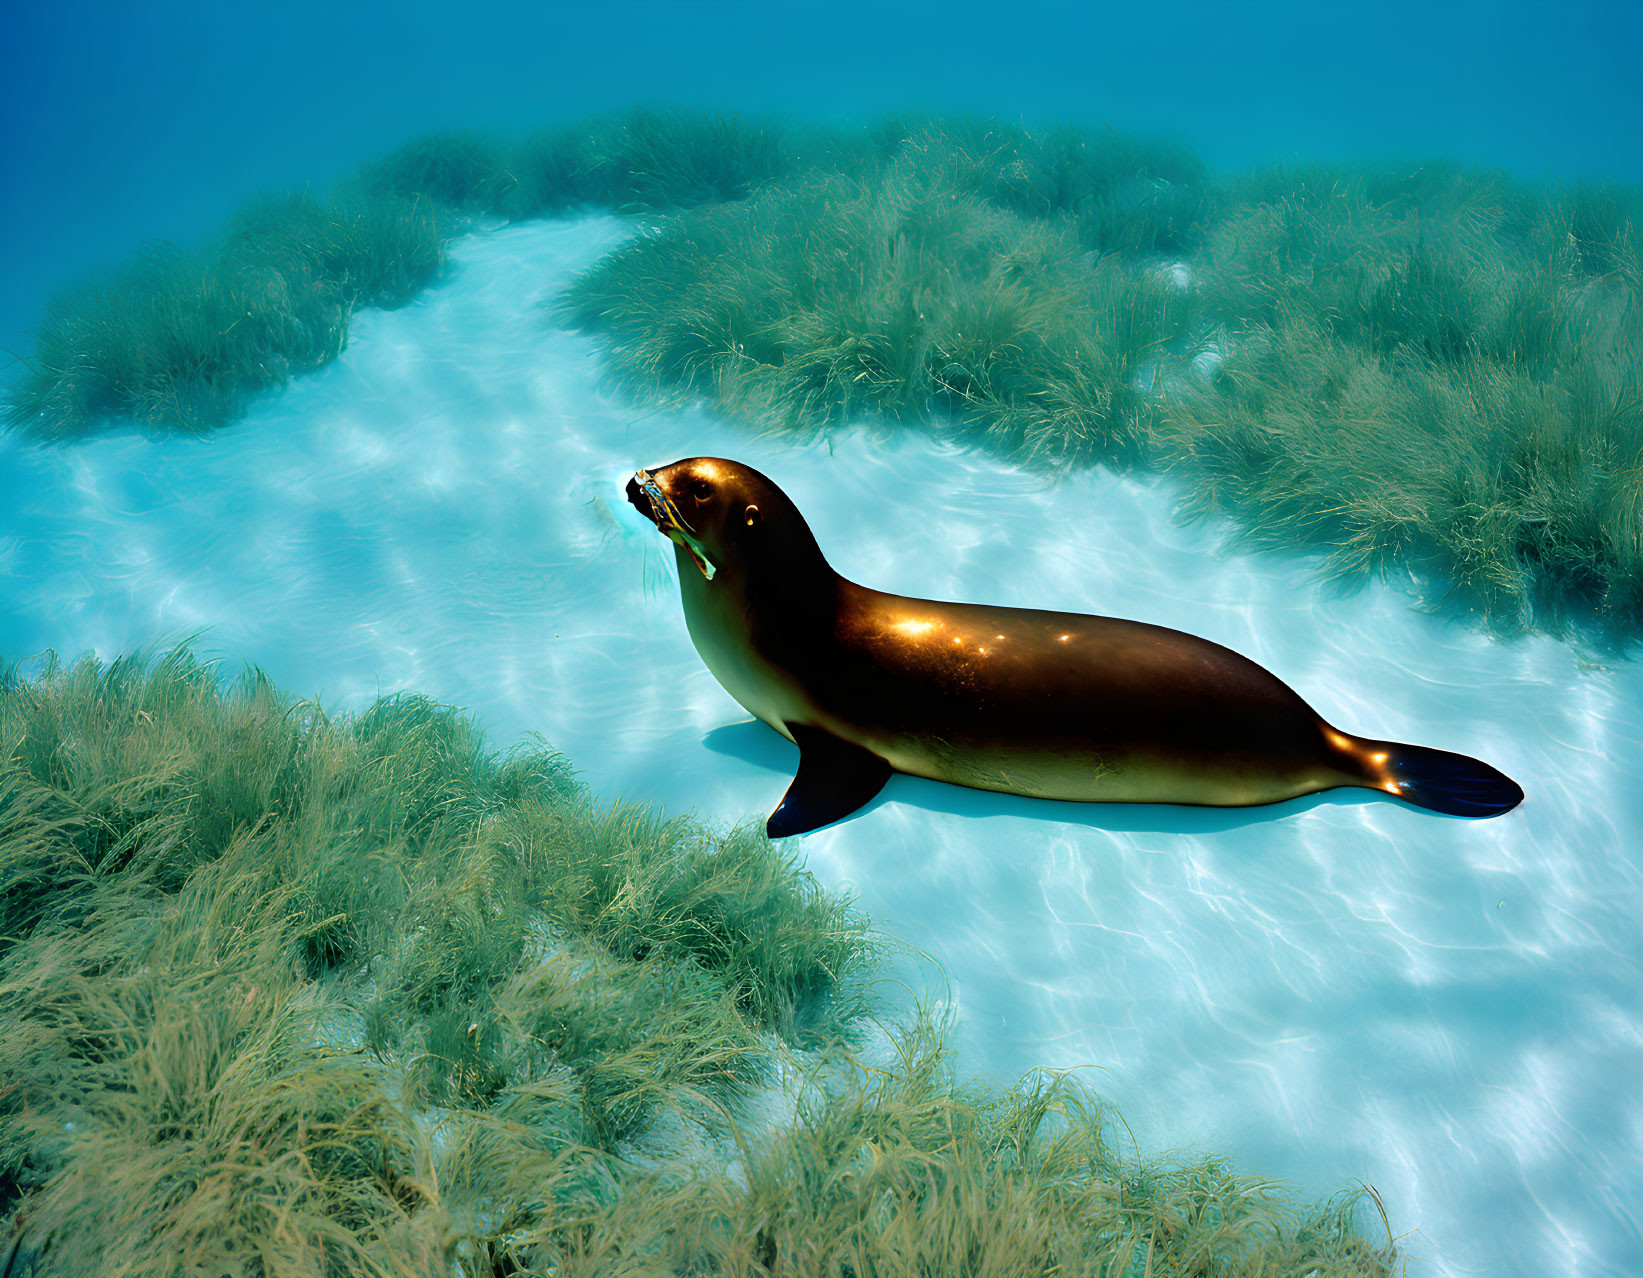 Sea lion swimming over seagrass-covered seabed in sunlight